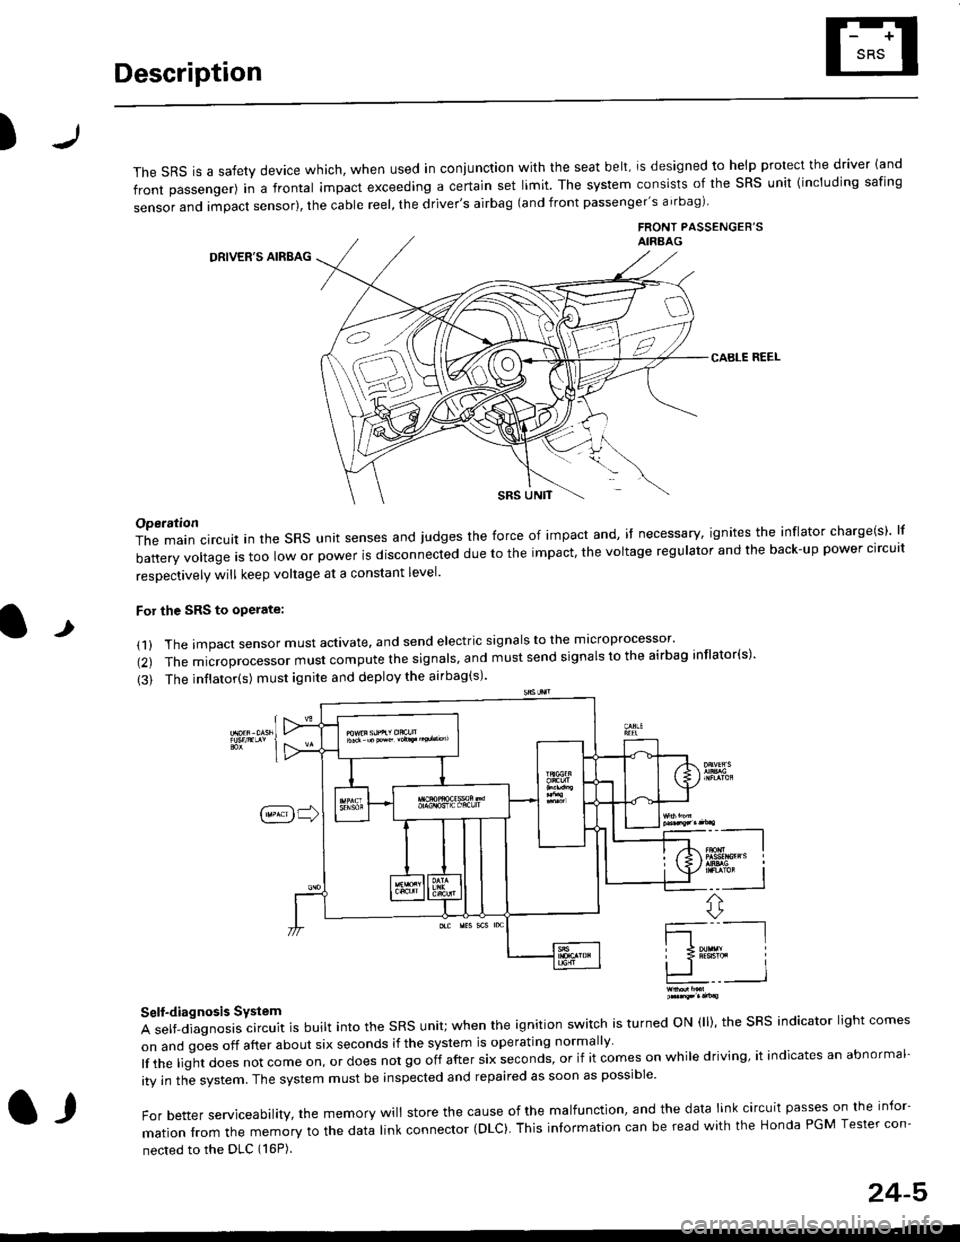 HONDA CIVIC 1999 6.G Workshop Manual Description
)
The sRS is a safety device which, when used in coniunction with the seat belt, is designed to help protect the driver land
front passenger) in a frontal impact exceeding a certain set li